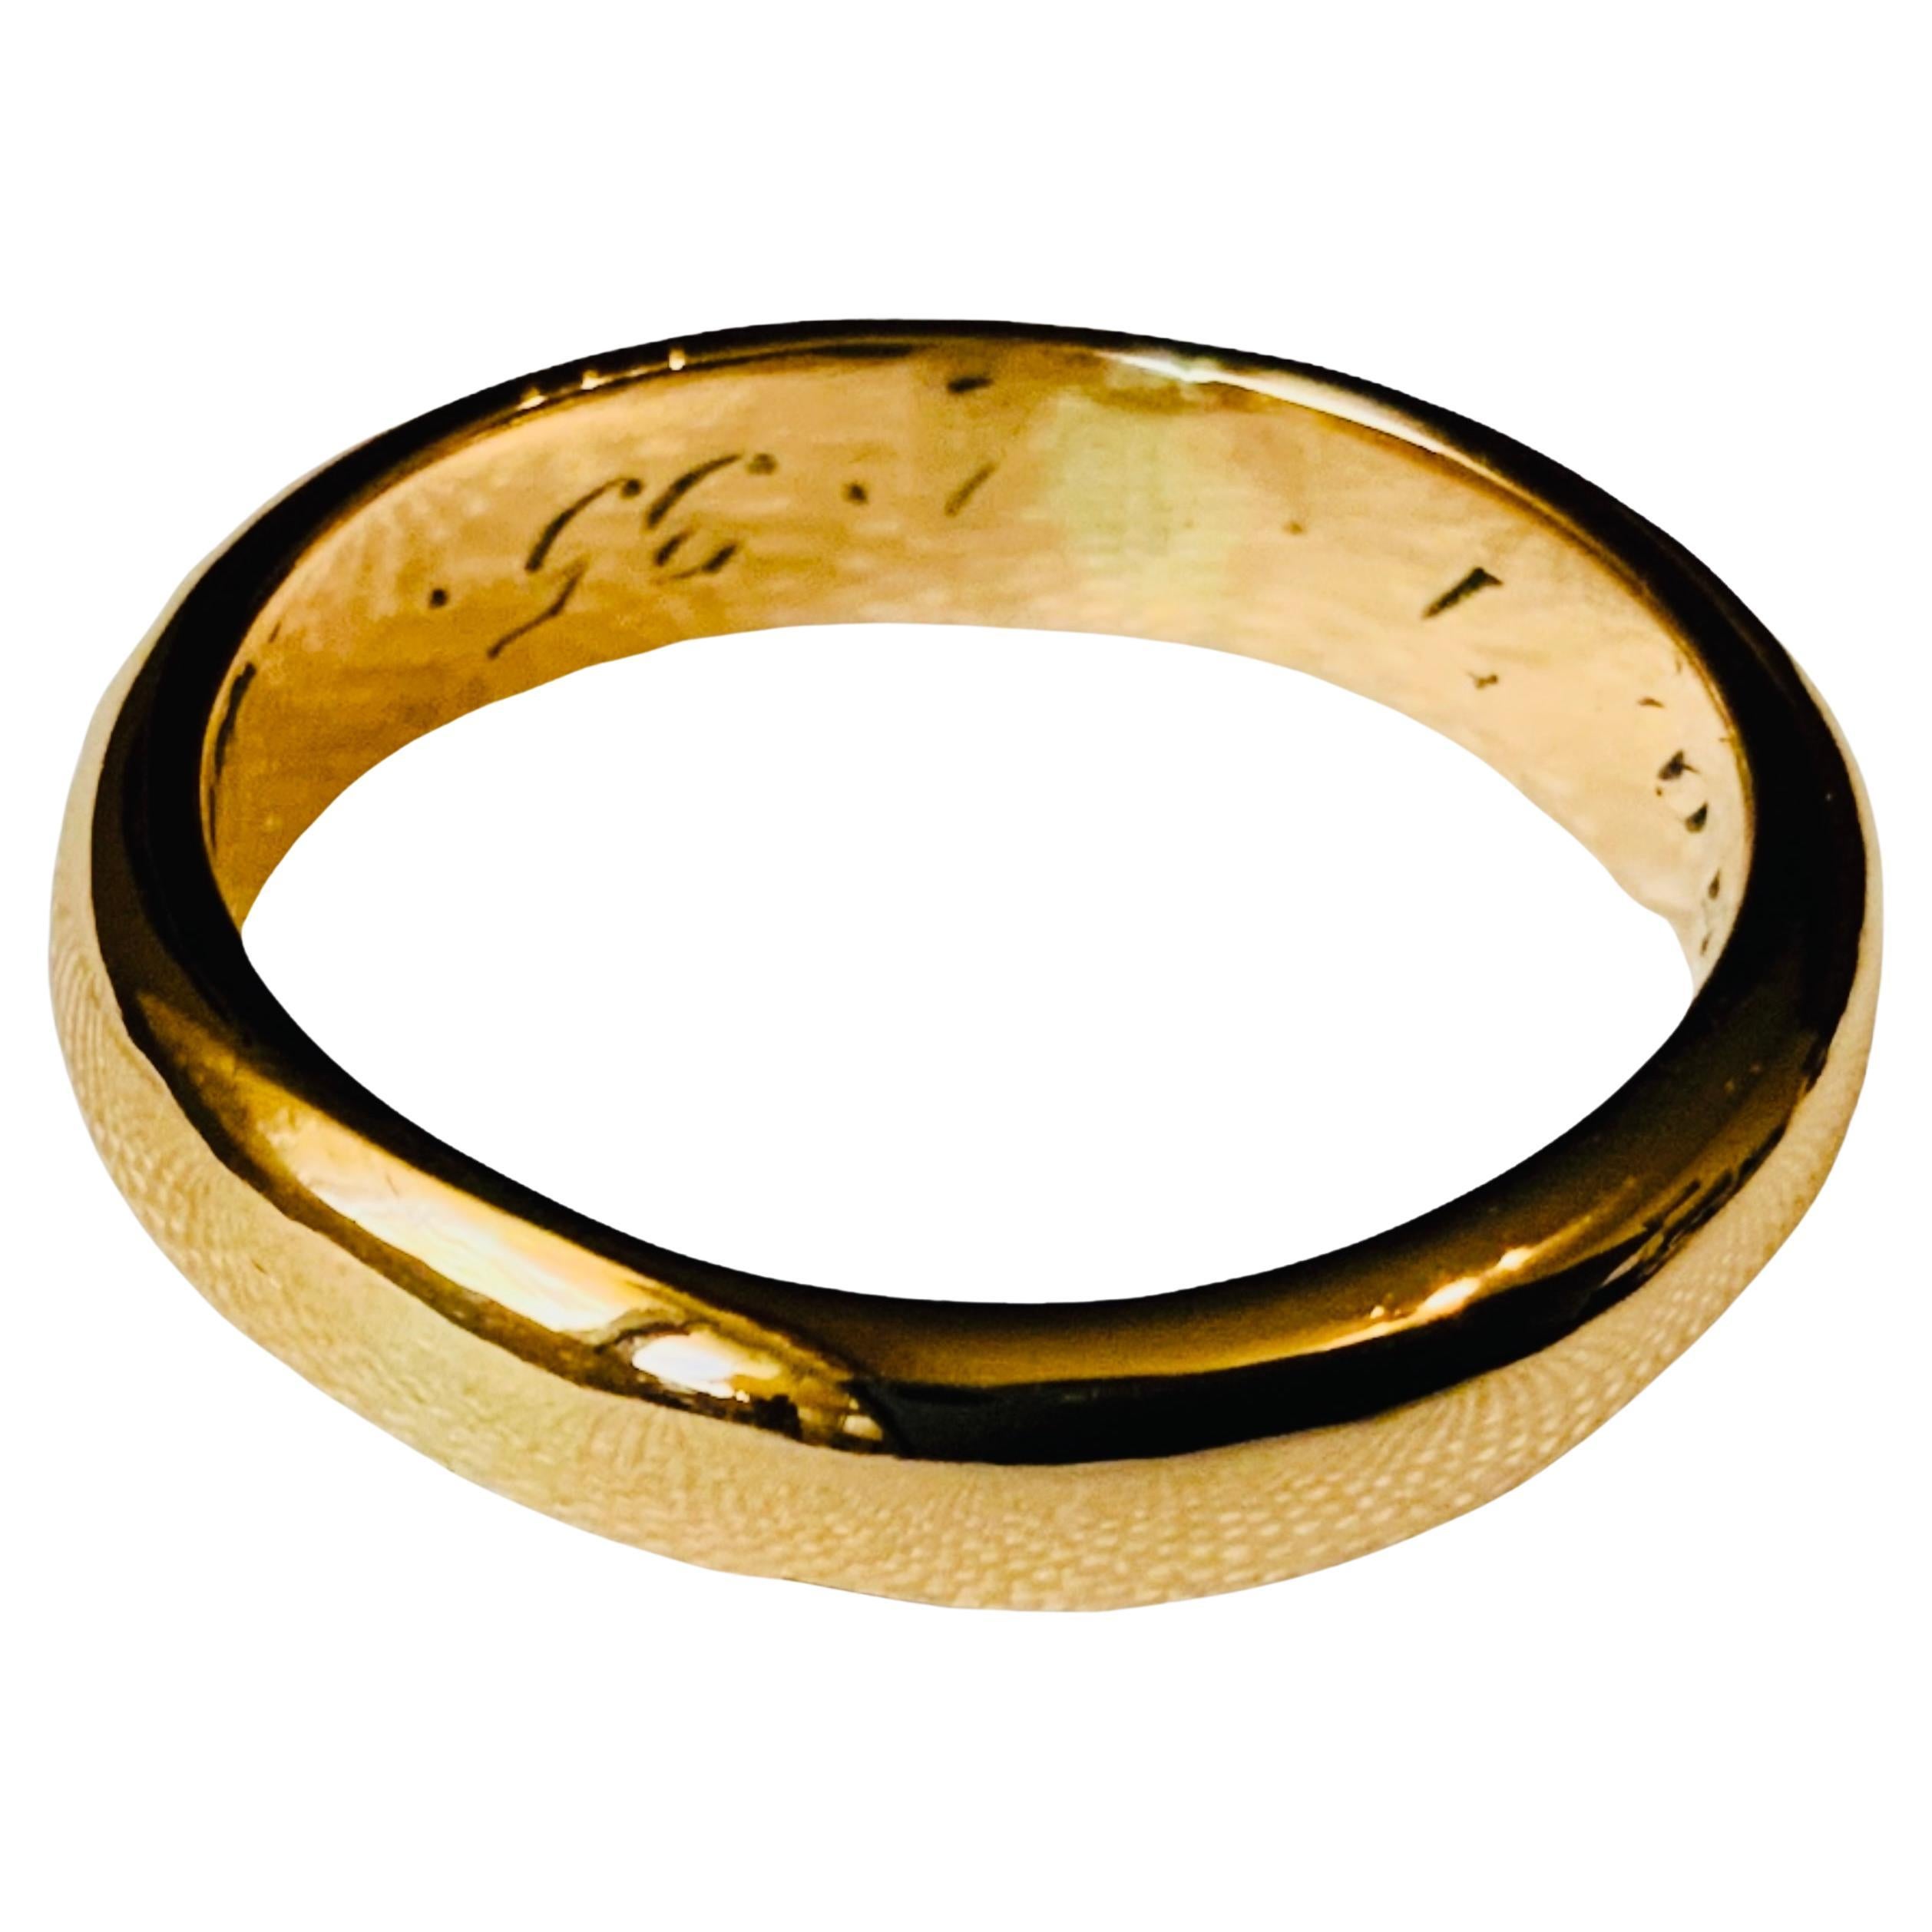  Gold Band Wedding Ring For Sale